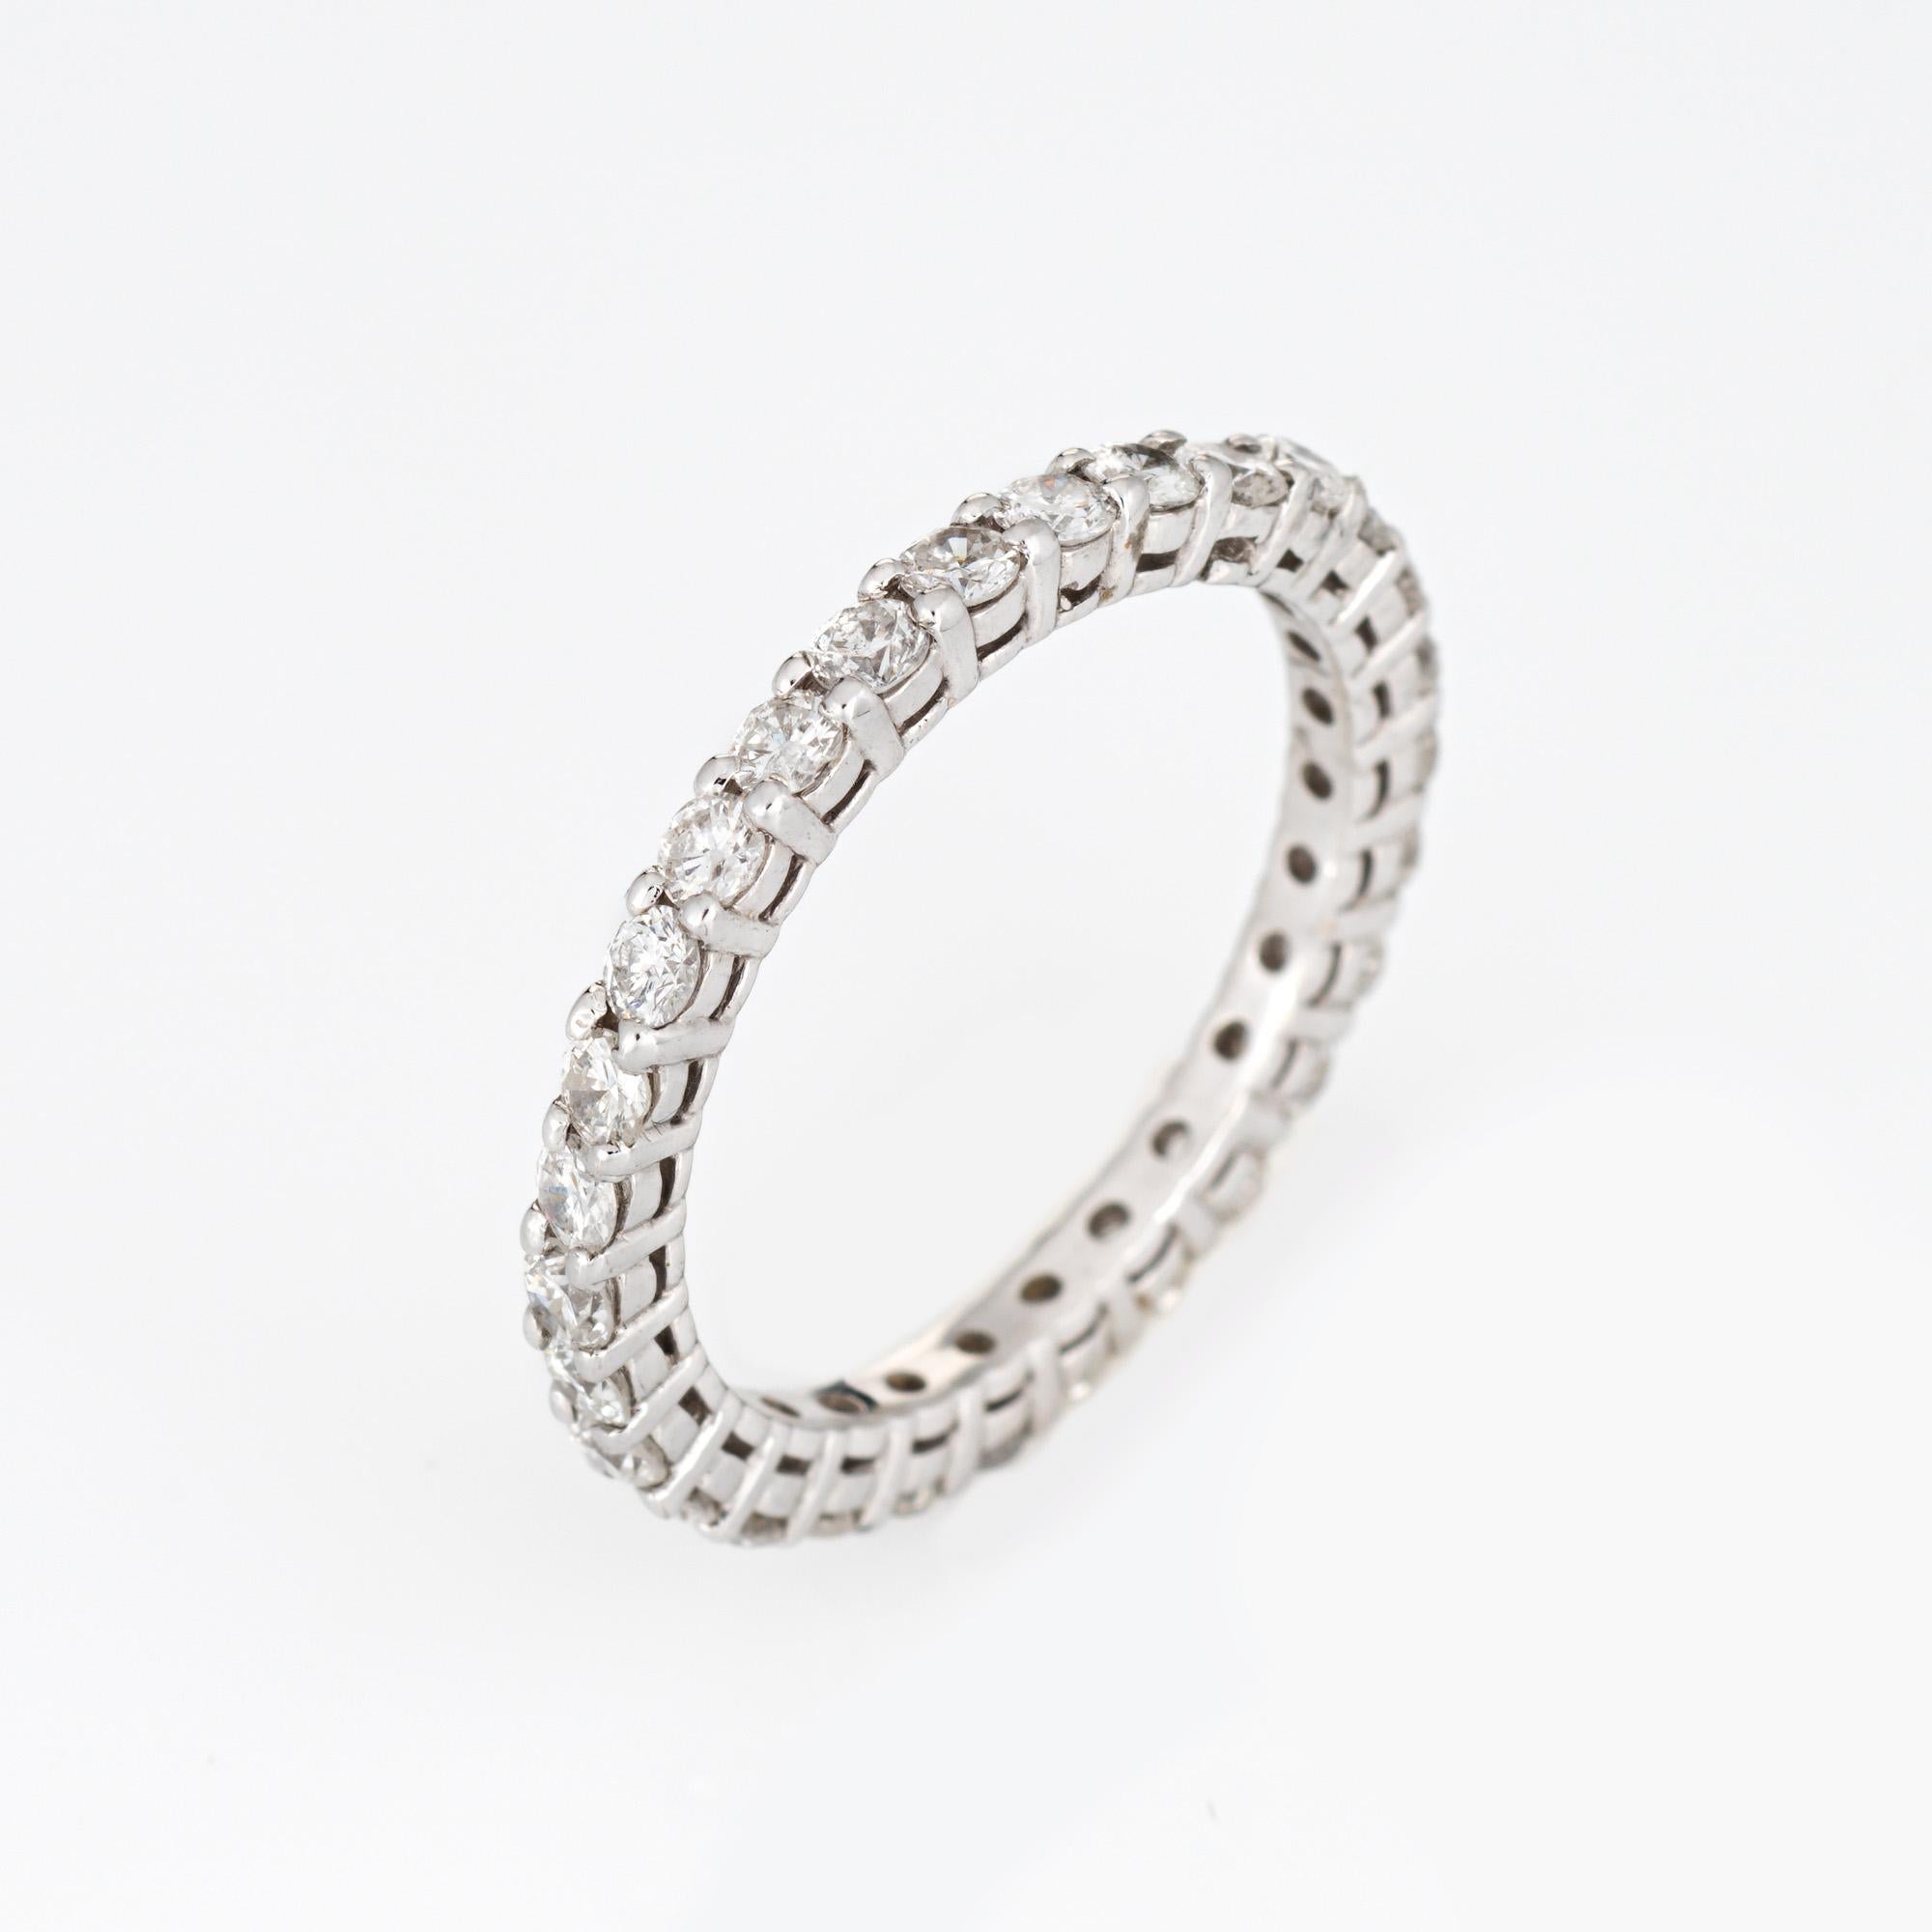 Stylish vintage diamond eternity ring crafted in 14 karat white gold. 

Round brilliant cut diamonds total an estimated 1.60 carats (estimated at H-I color and SI1-I1 clarity).  

The simple and elegant band is great worn alone or stacked. The ring